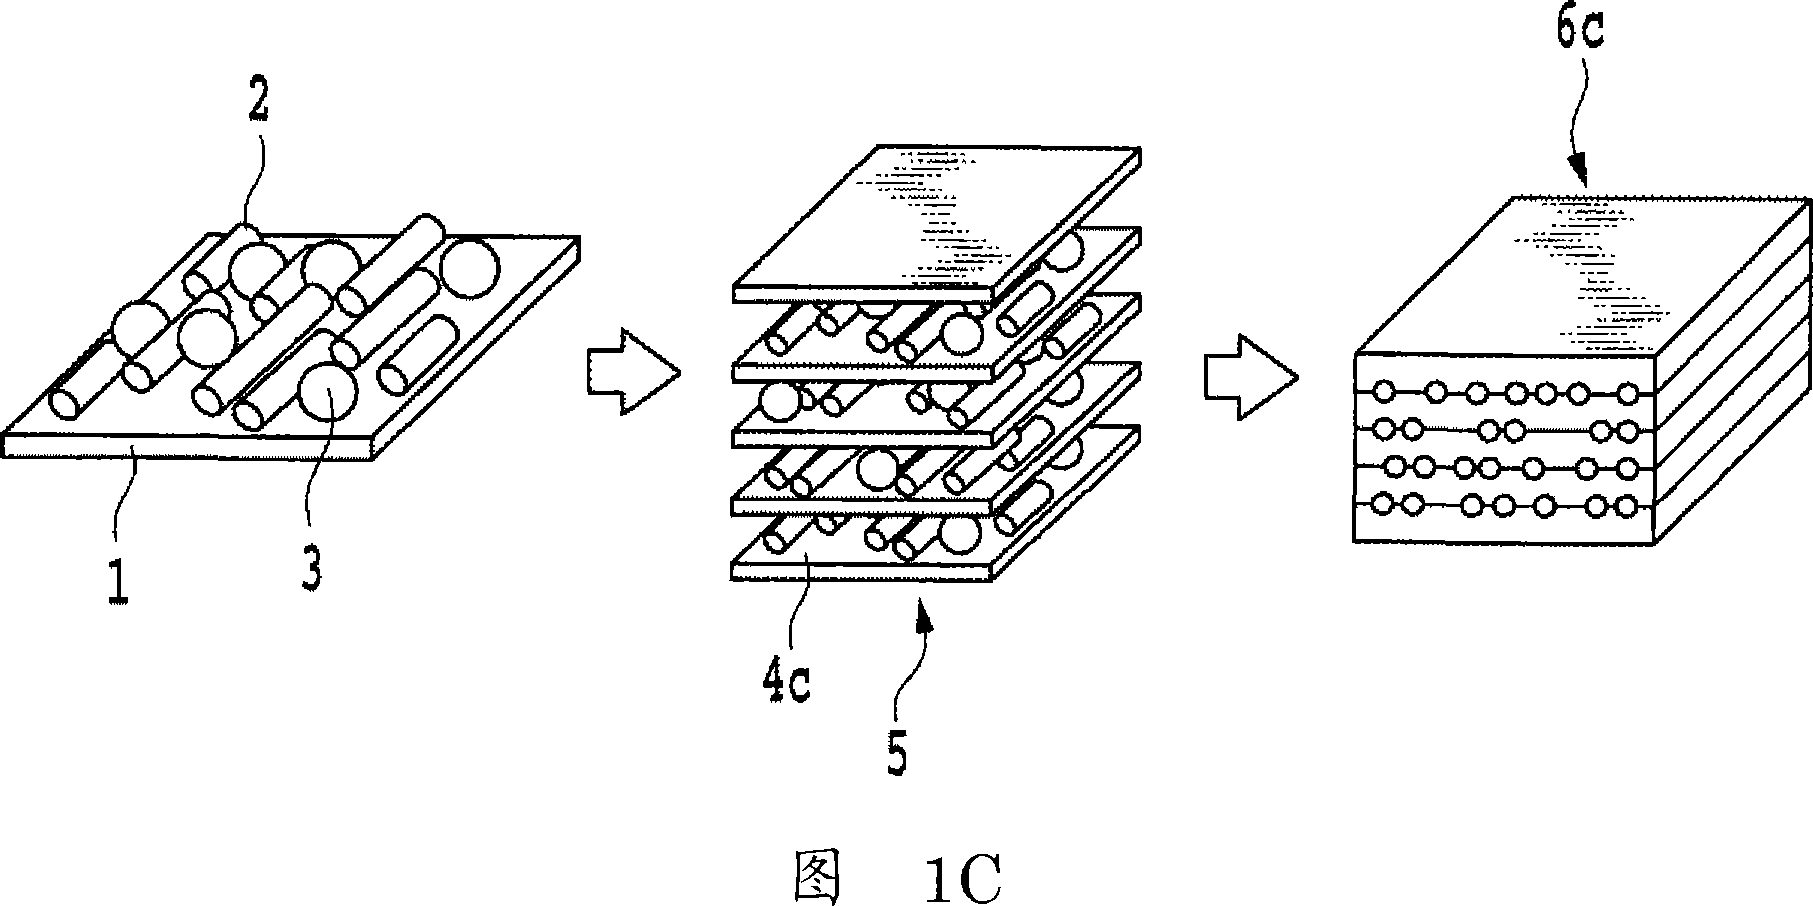 Metal-based carbon fiber composite material and producing method thereof